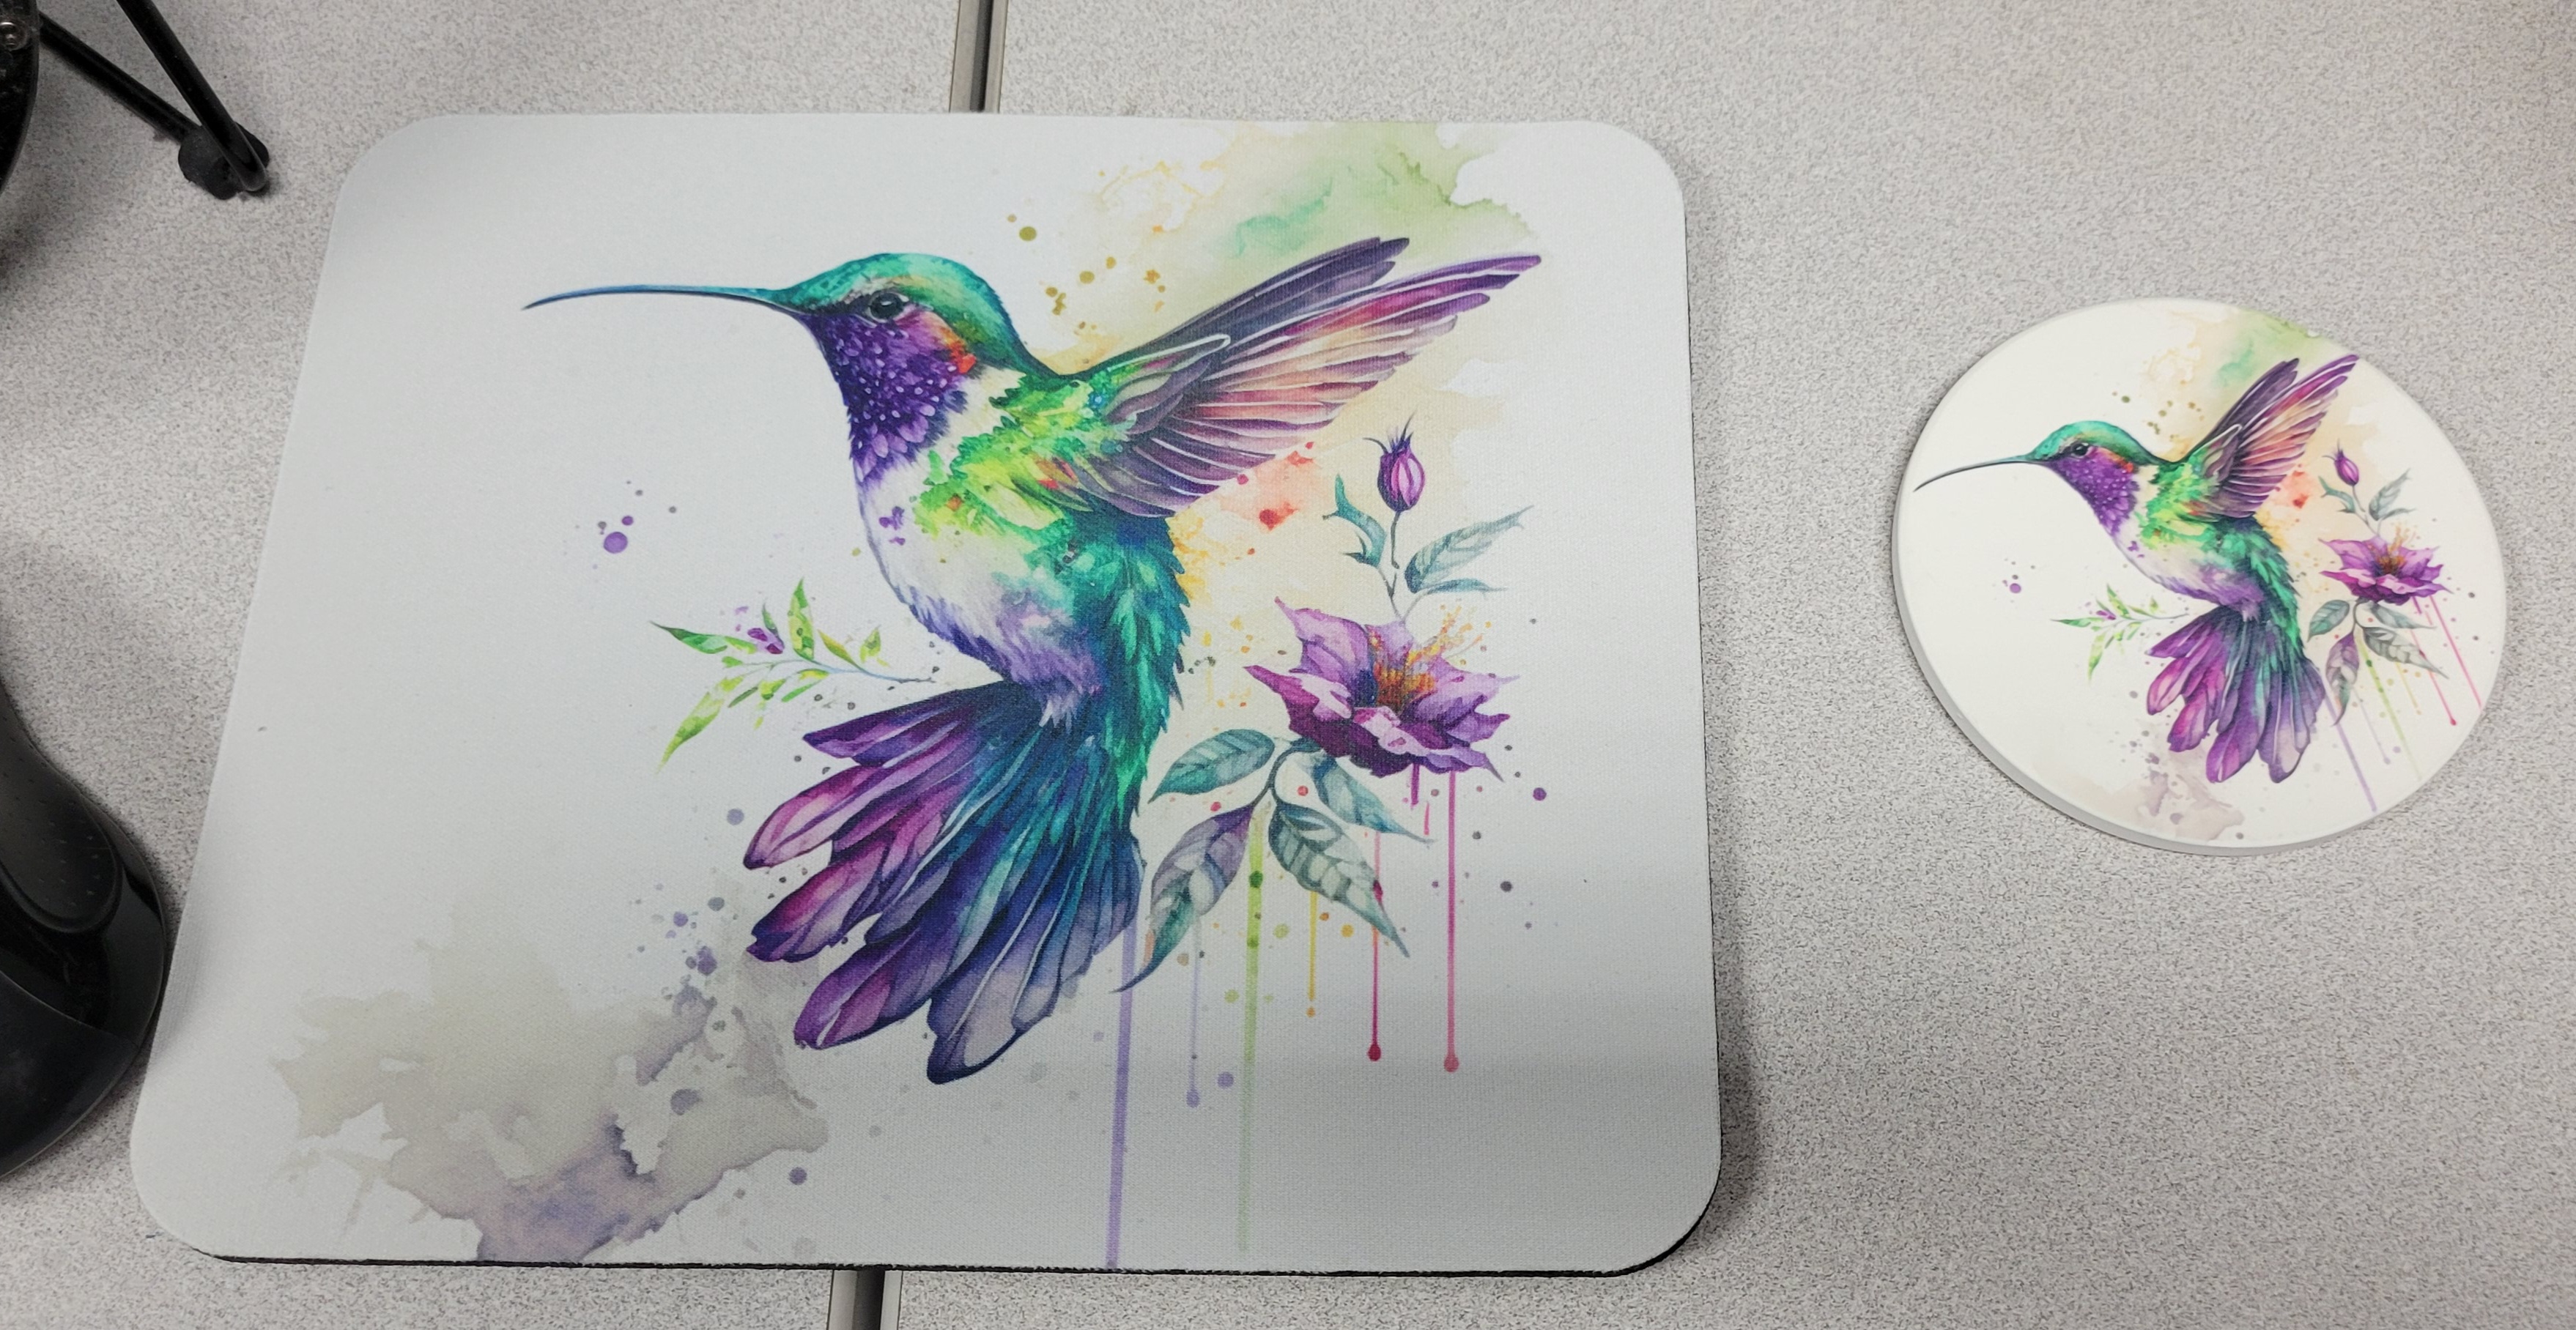 Mouse pad and coaster for my work desk